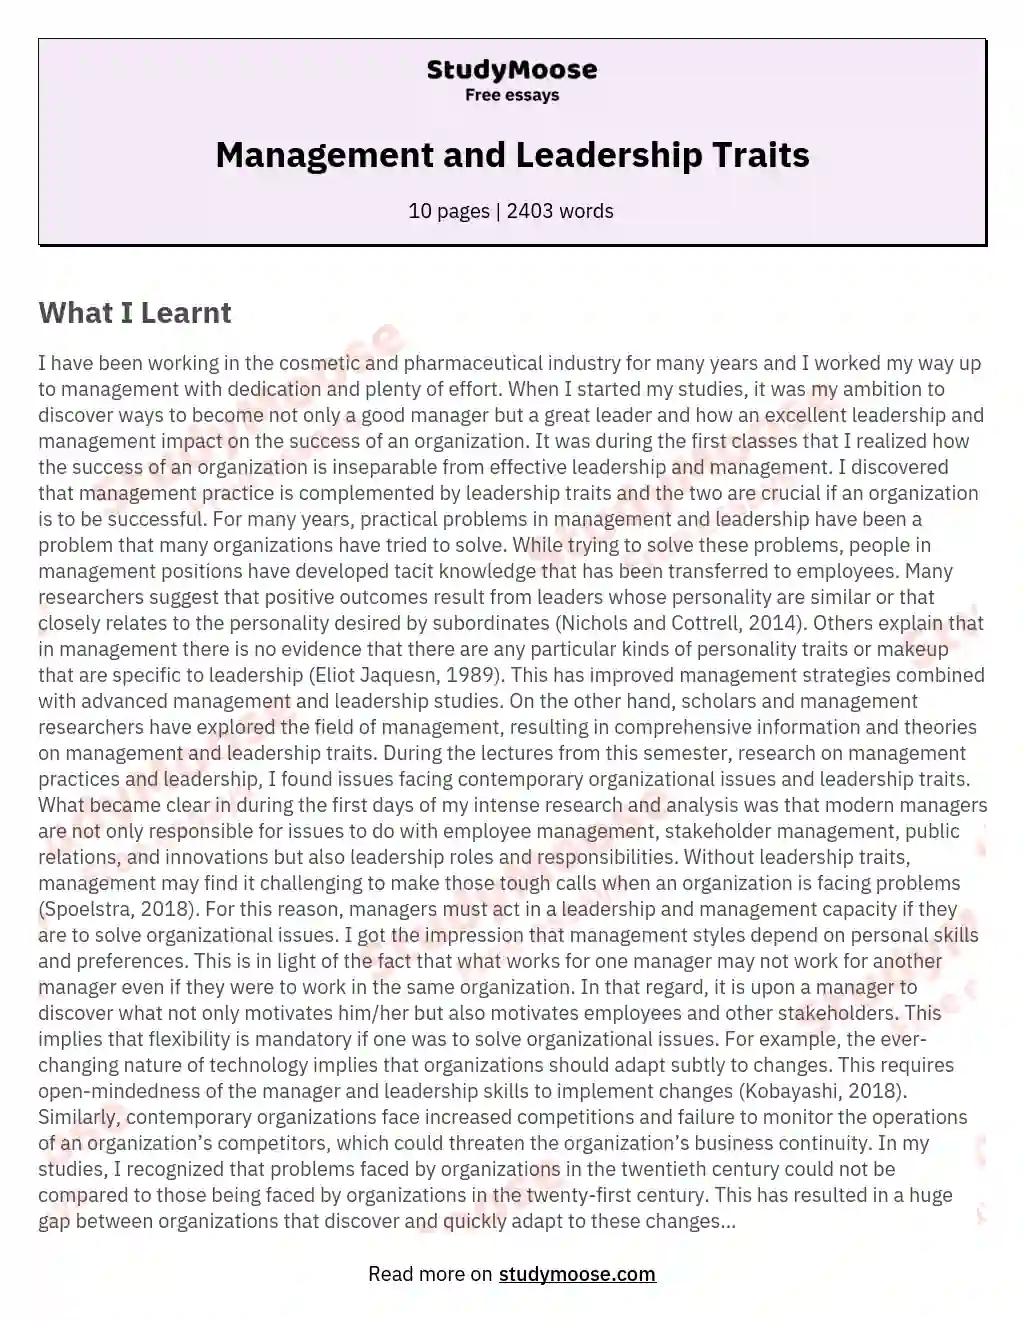 Management and Leadership Traits essay